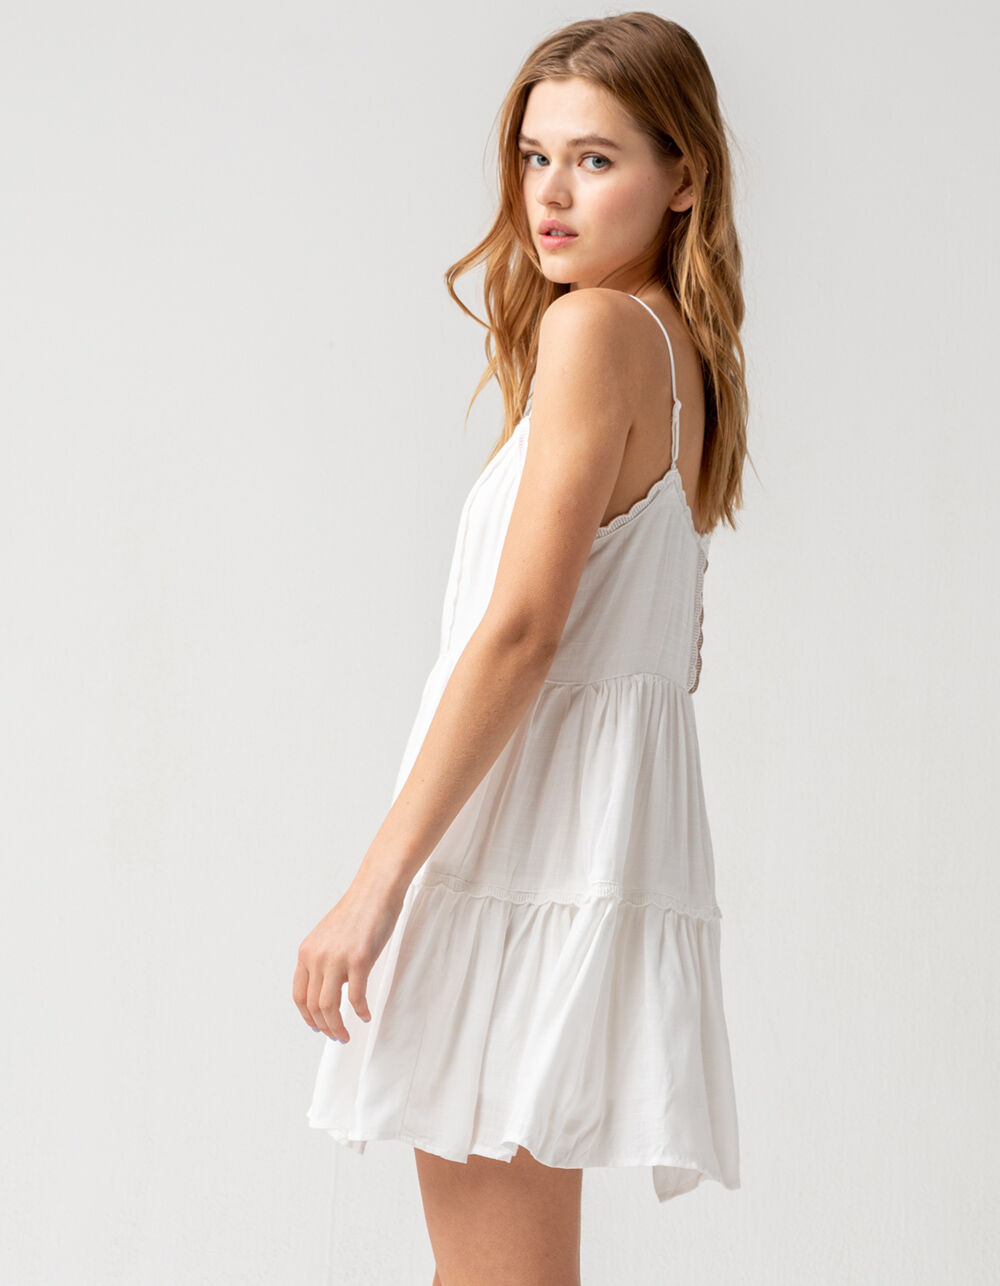 SKY AND SPARROW Solid Babydoll Dress - WHITE | Tillys